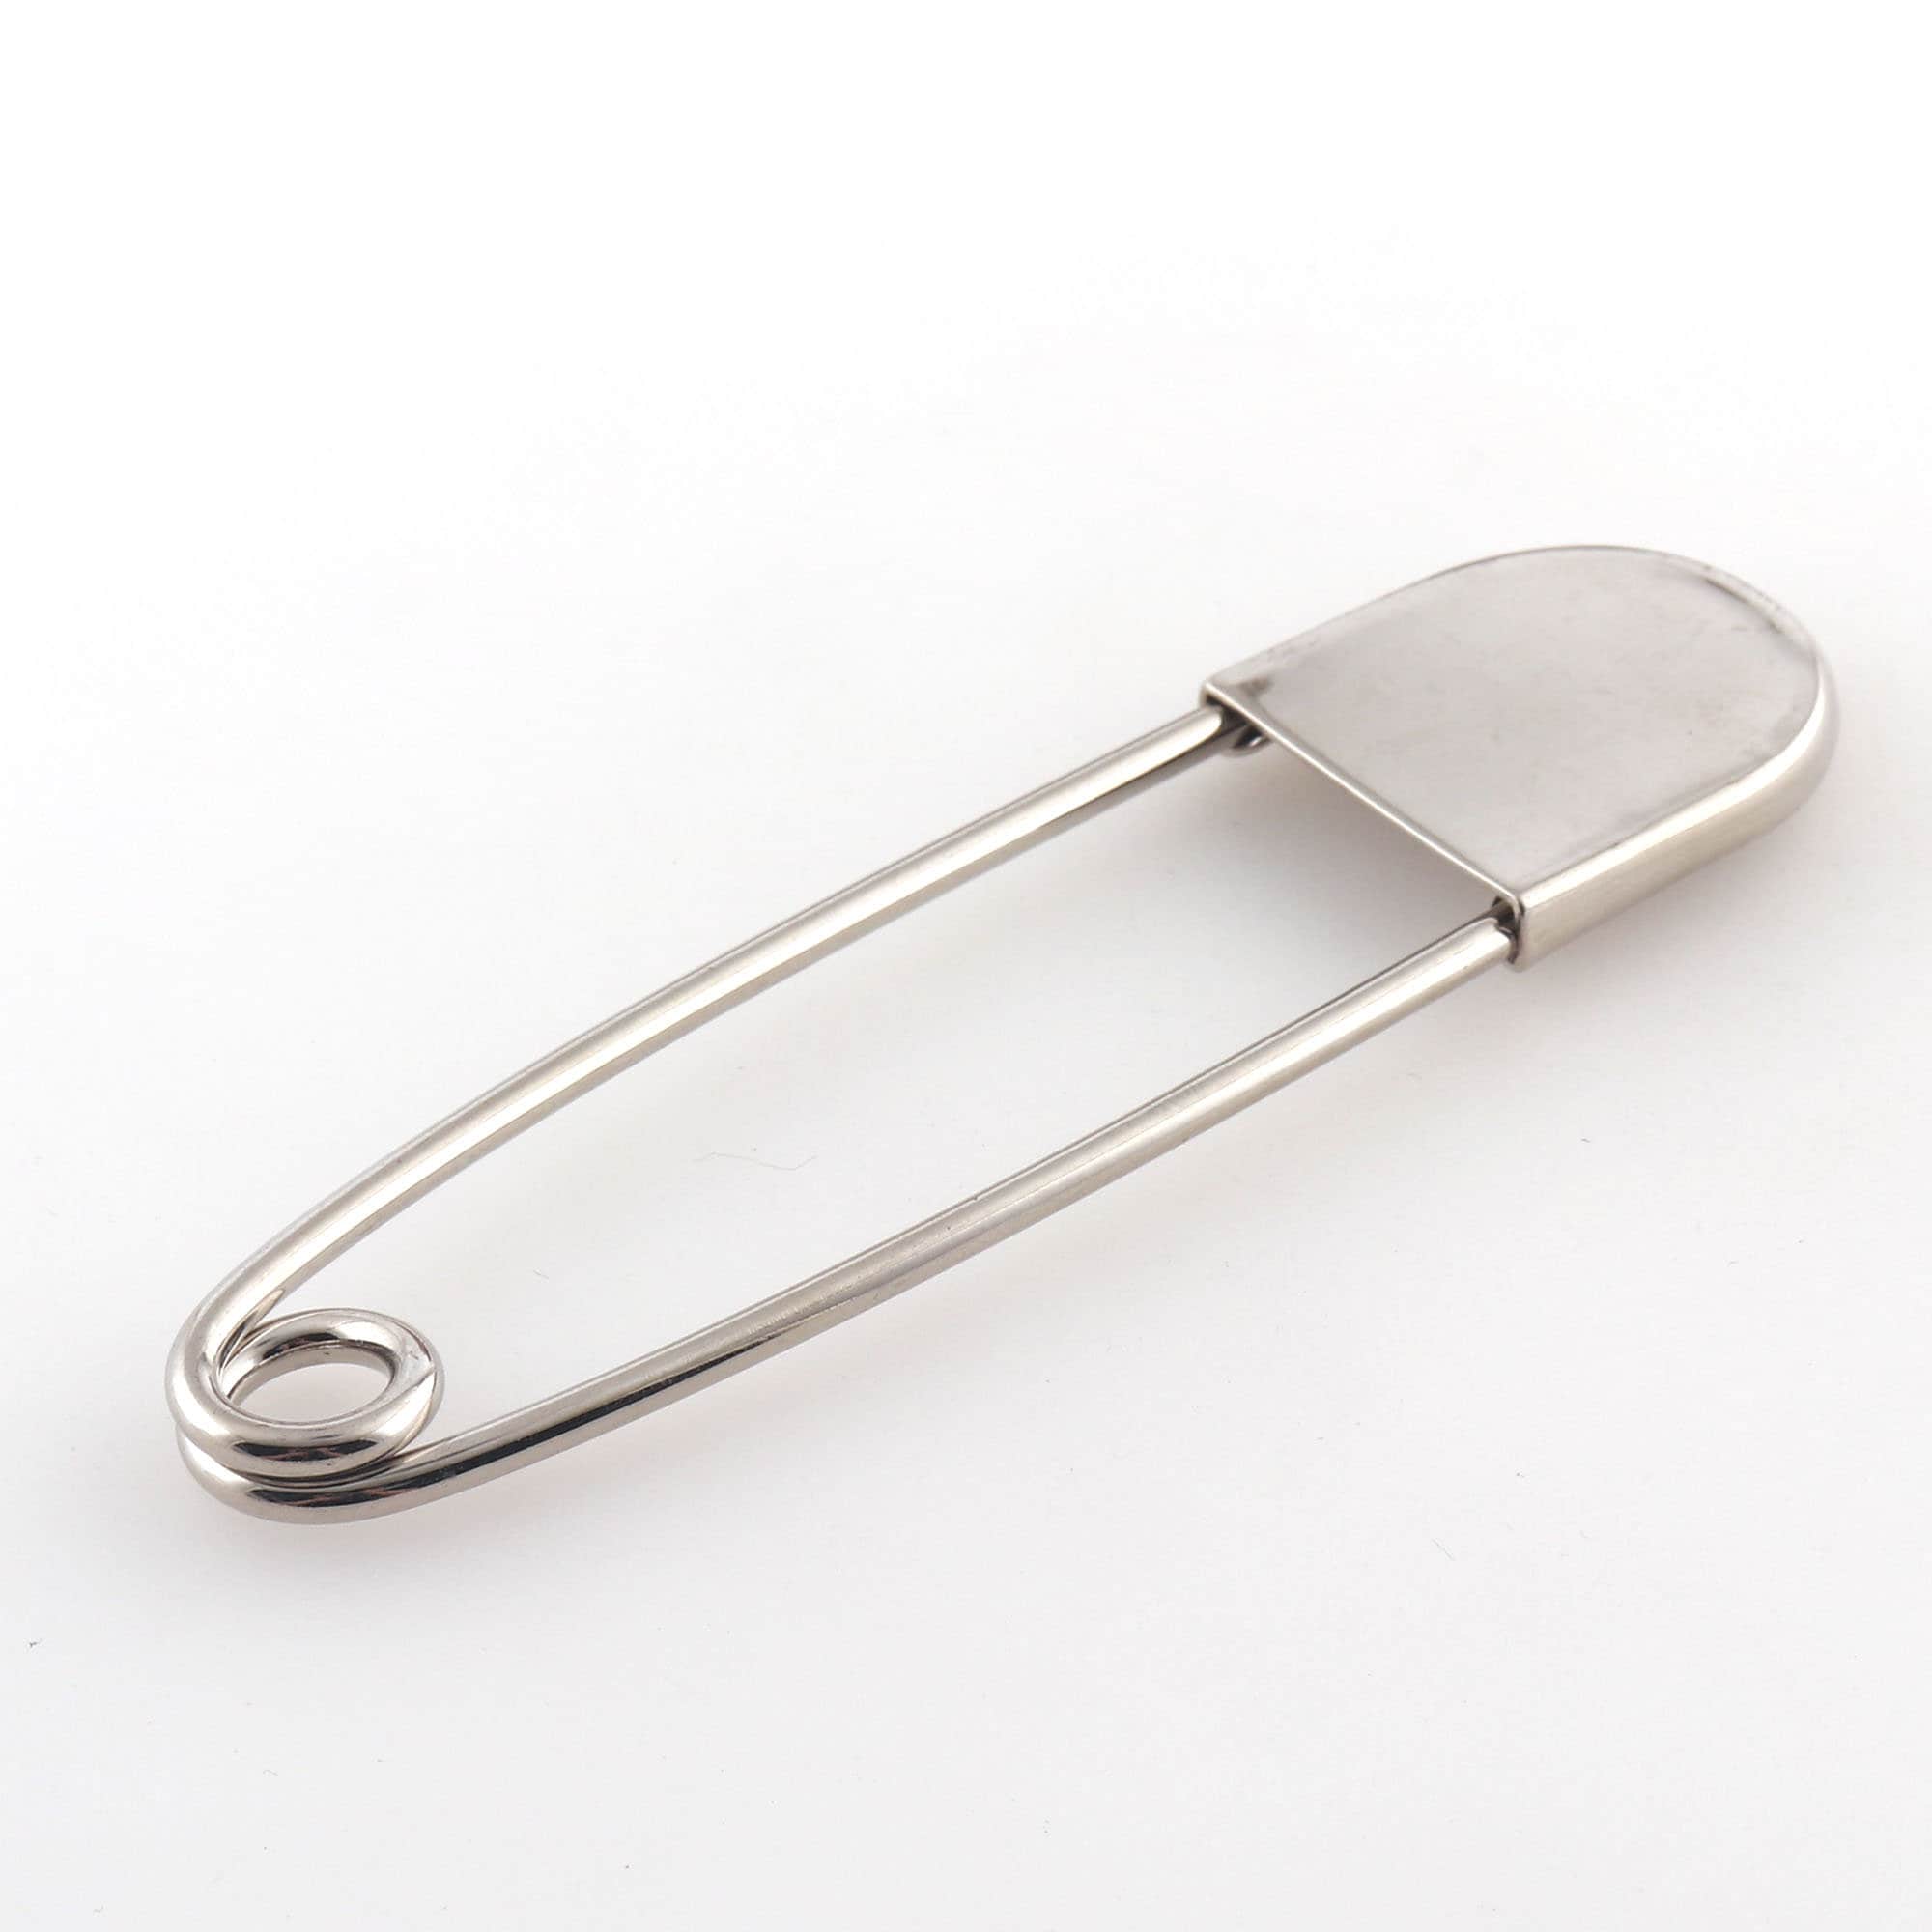 Silver Safety Pins 85mm Coiless Safety Pins for Bead Craft Shawl